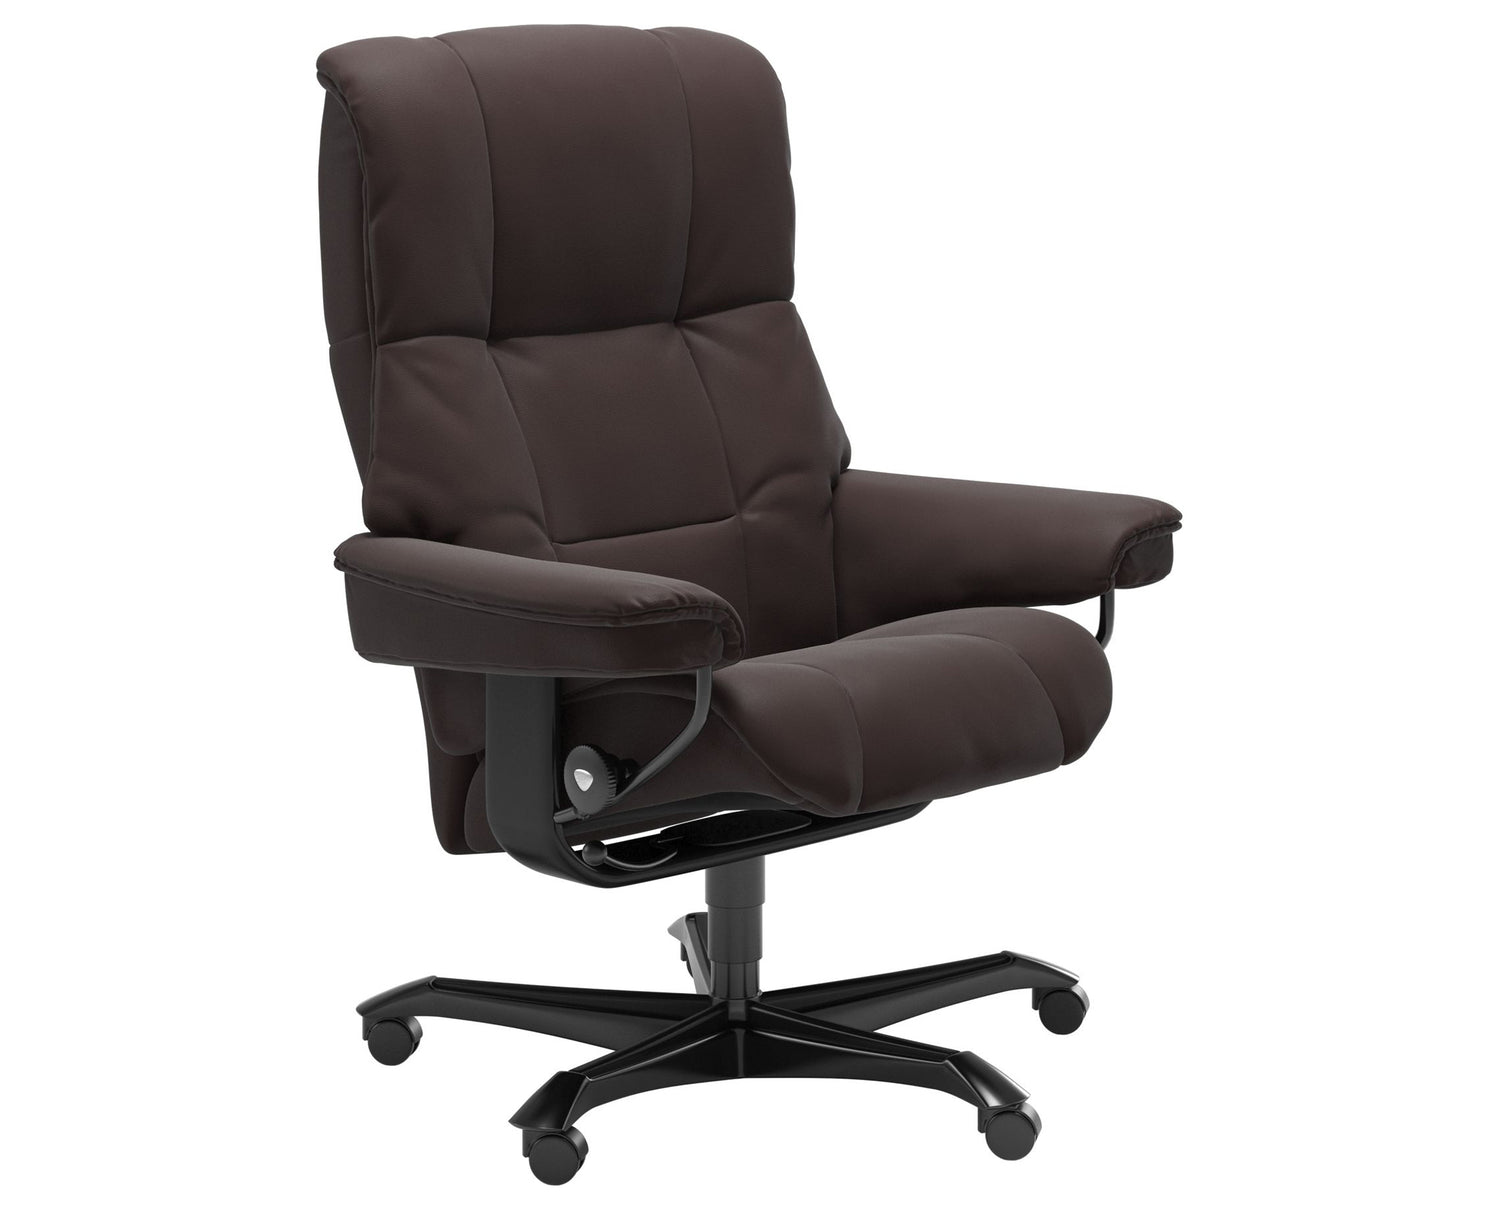 Paloma Leather Chocolate M & Black Base | Stressless Mayfair Home Office Chair | Valley Ridge Furniture